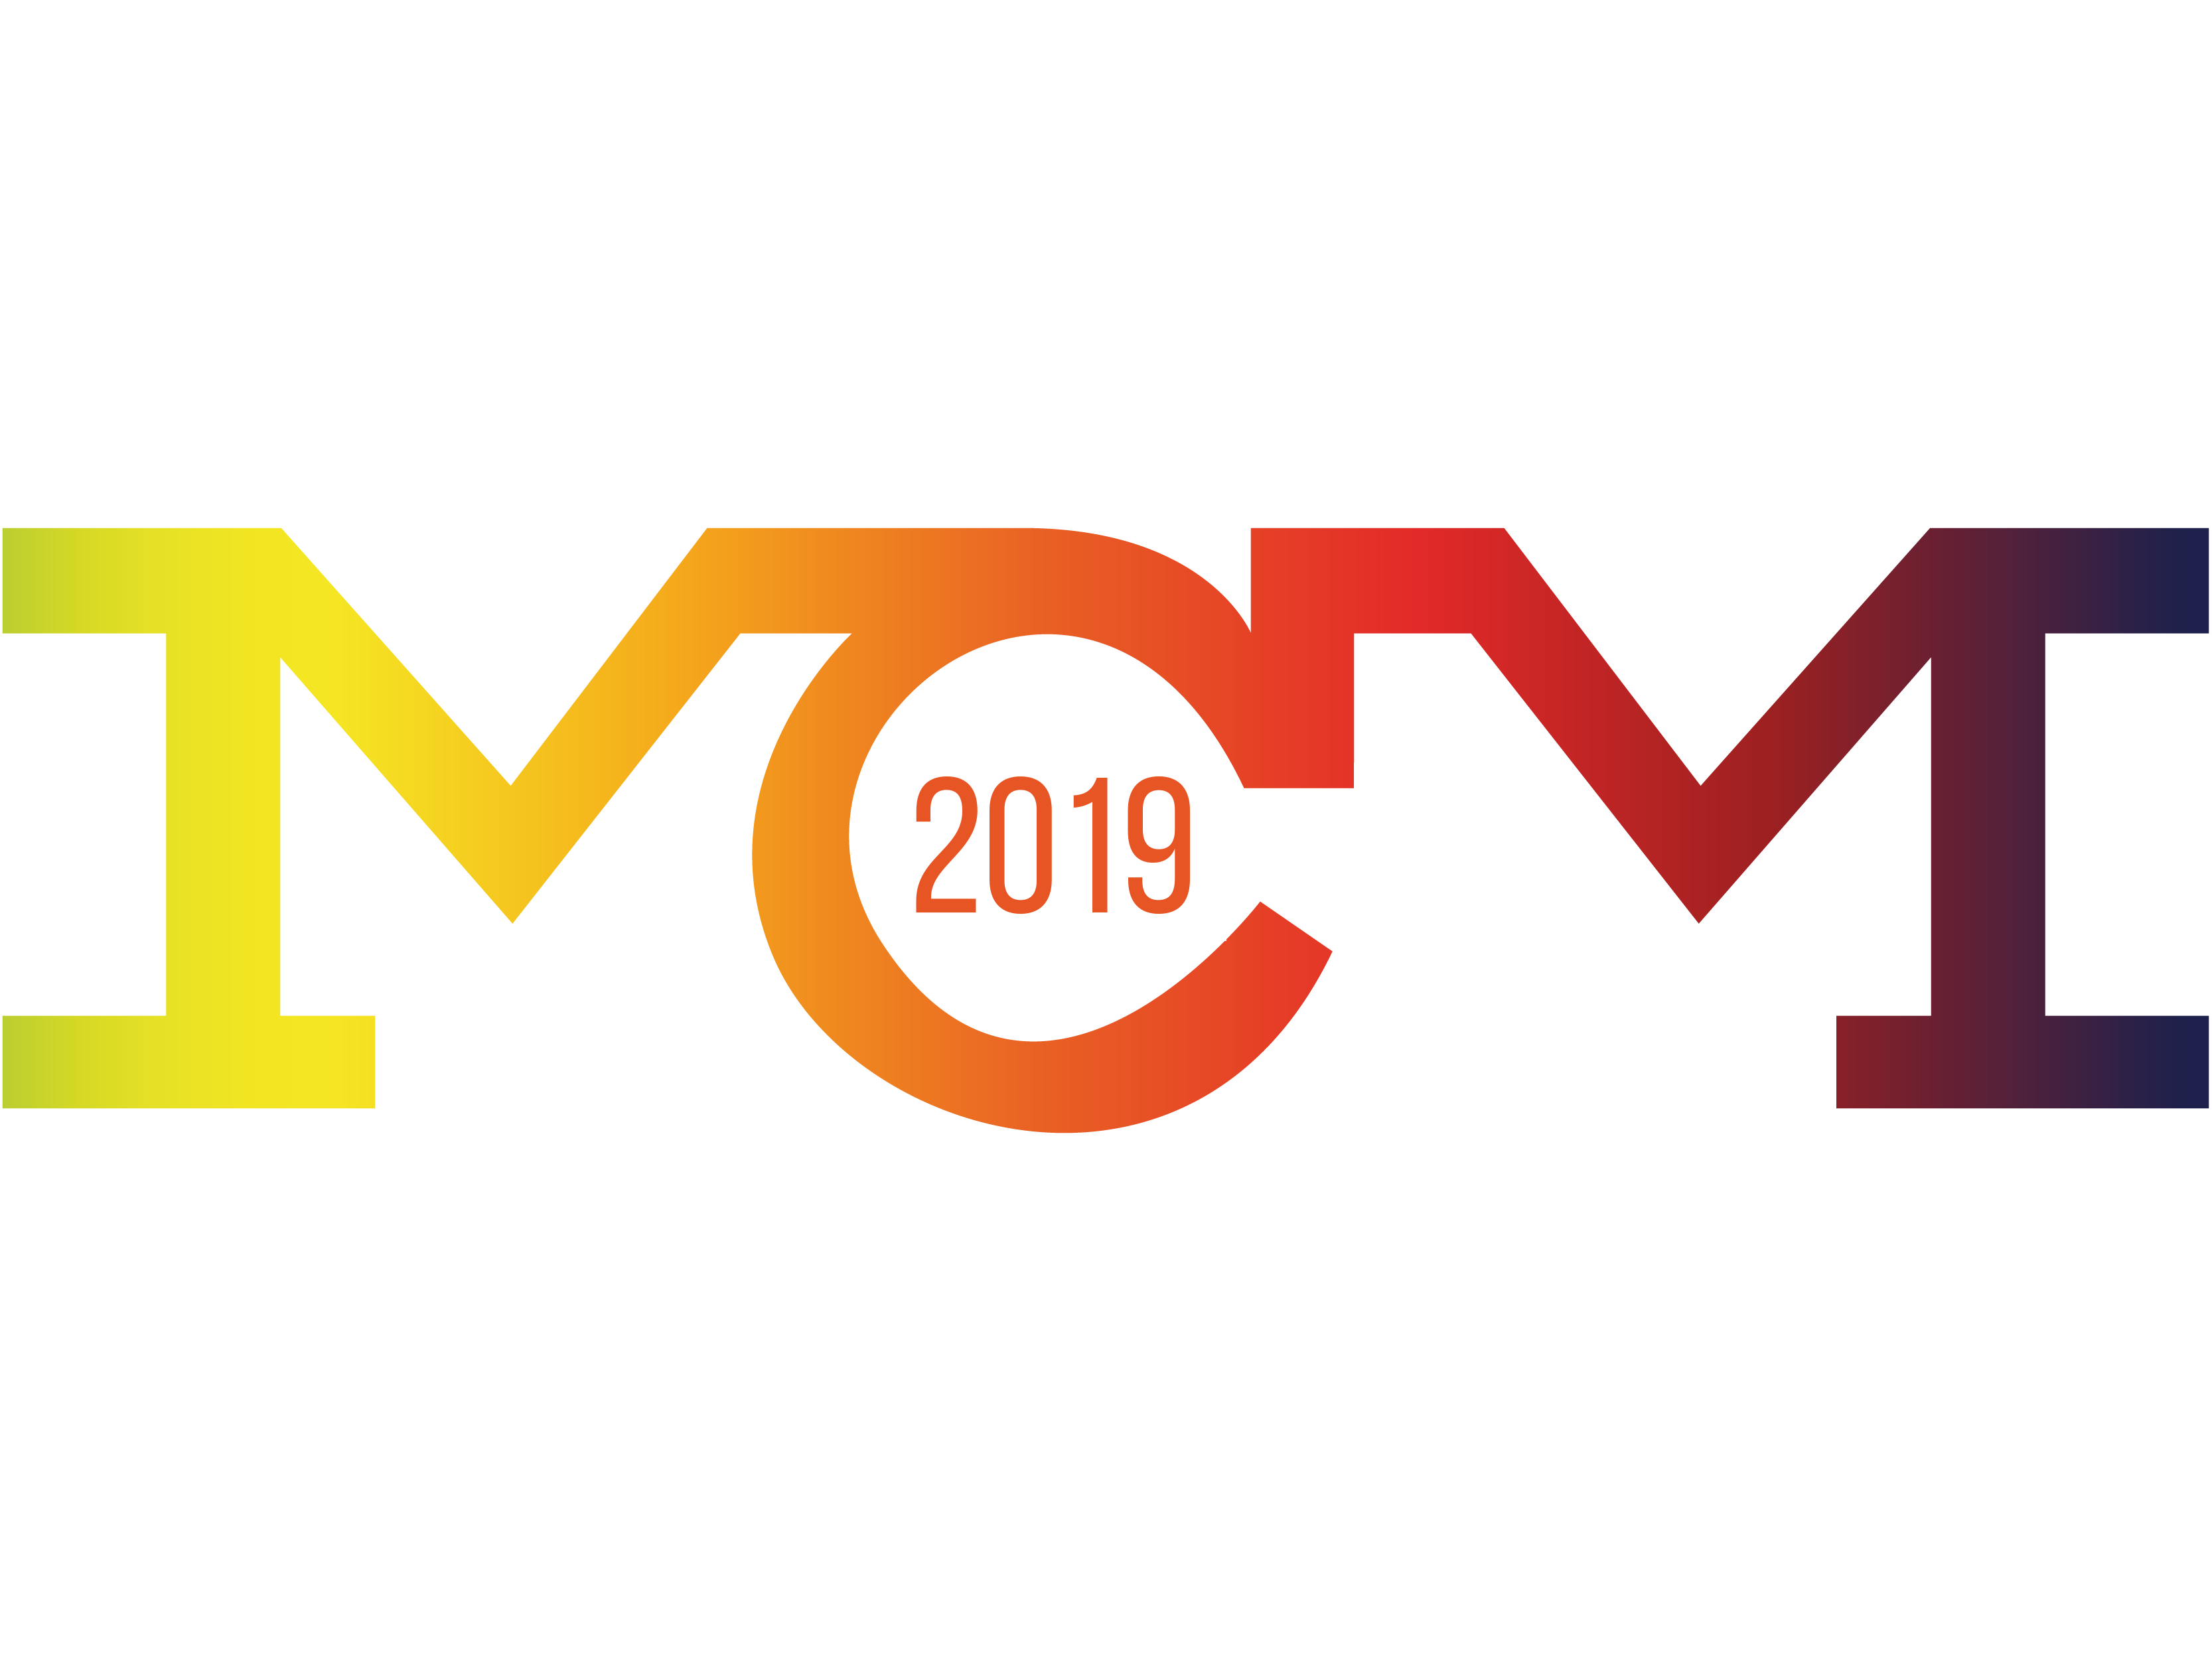 5th World Congress on Mechanical, Chemical, and Material Engineering (MCM'19)